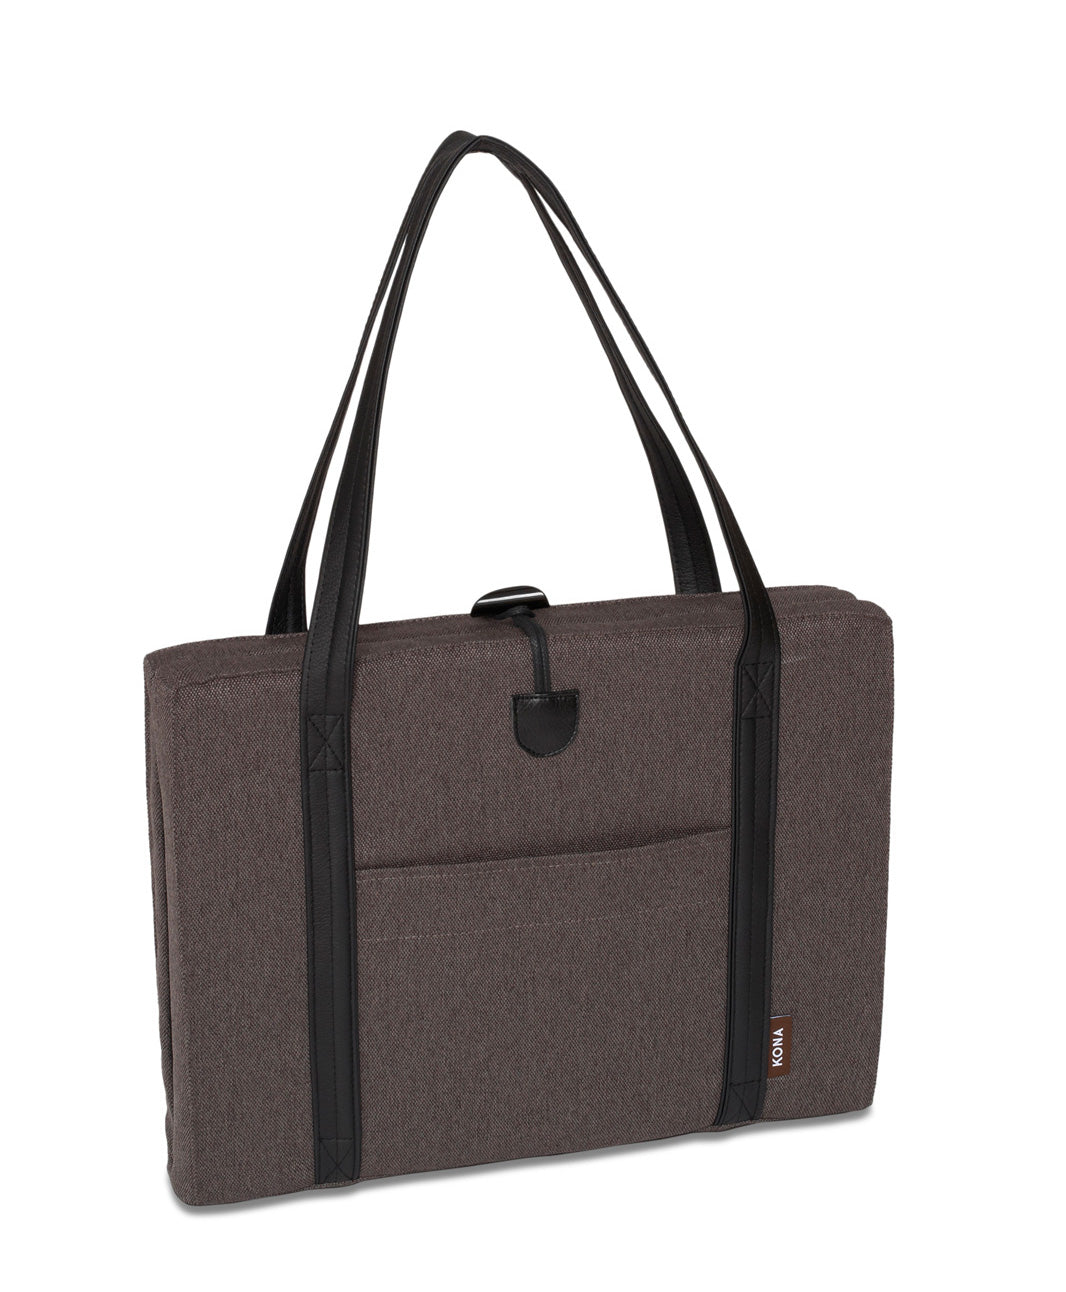 Zipper Bag - Match to Grey Travel Dog Bed with Black Ultra Suede Lining